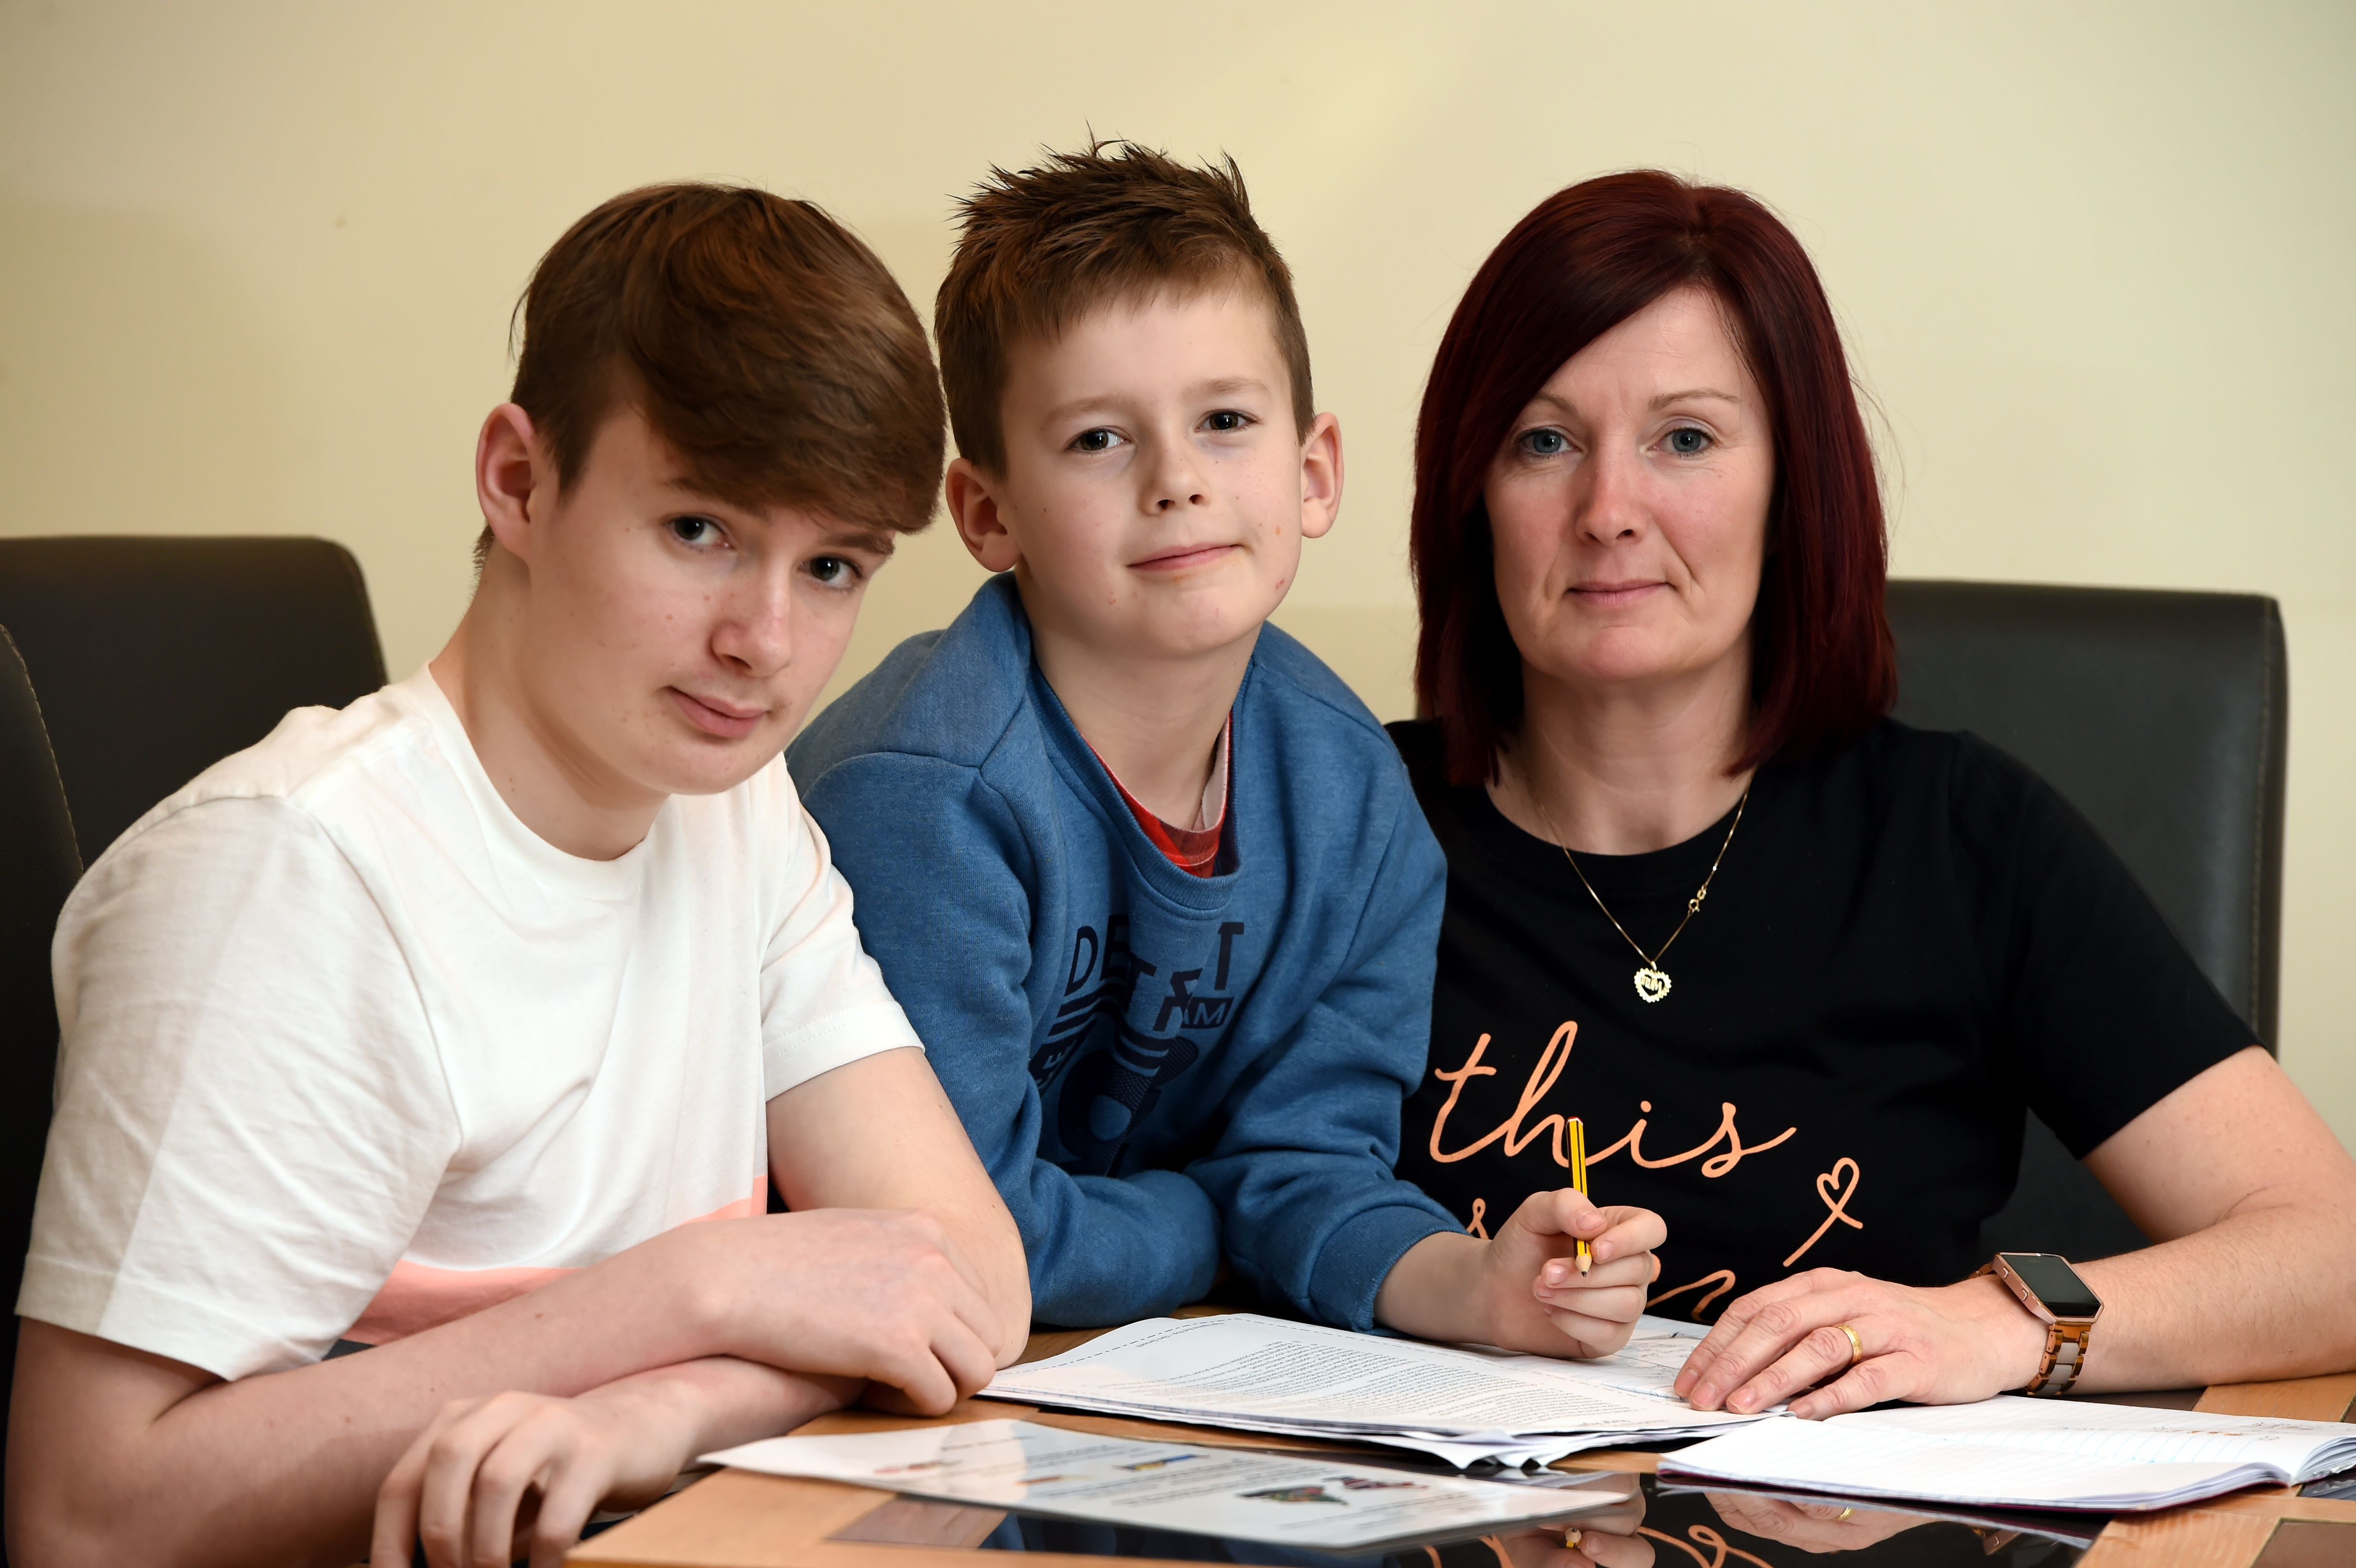 achael Smith with her children who suffer from dyslexia (L-R) Brook, 15, and Archie, 8